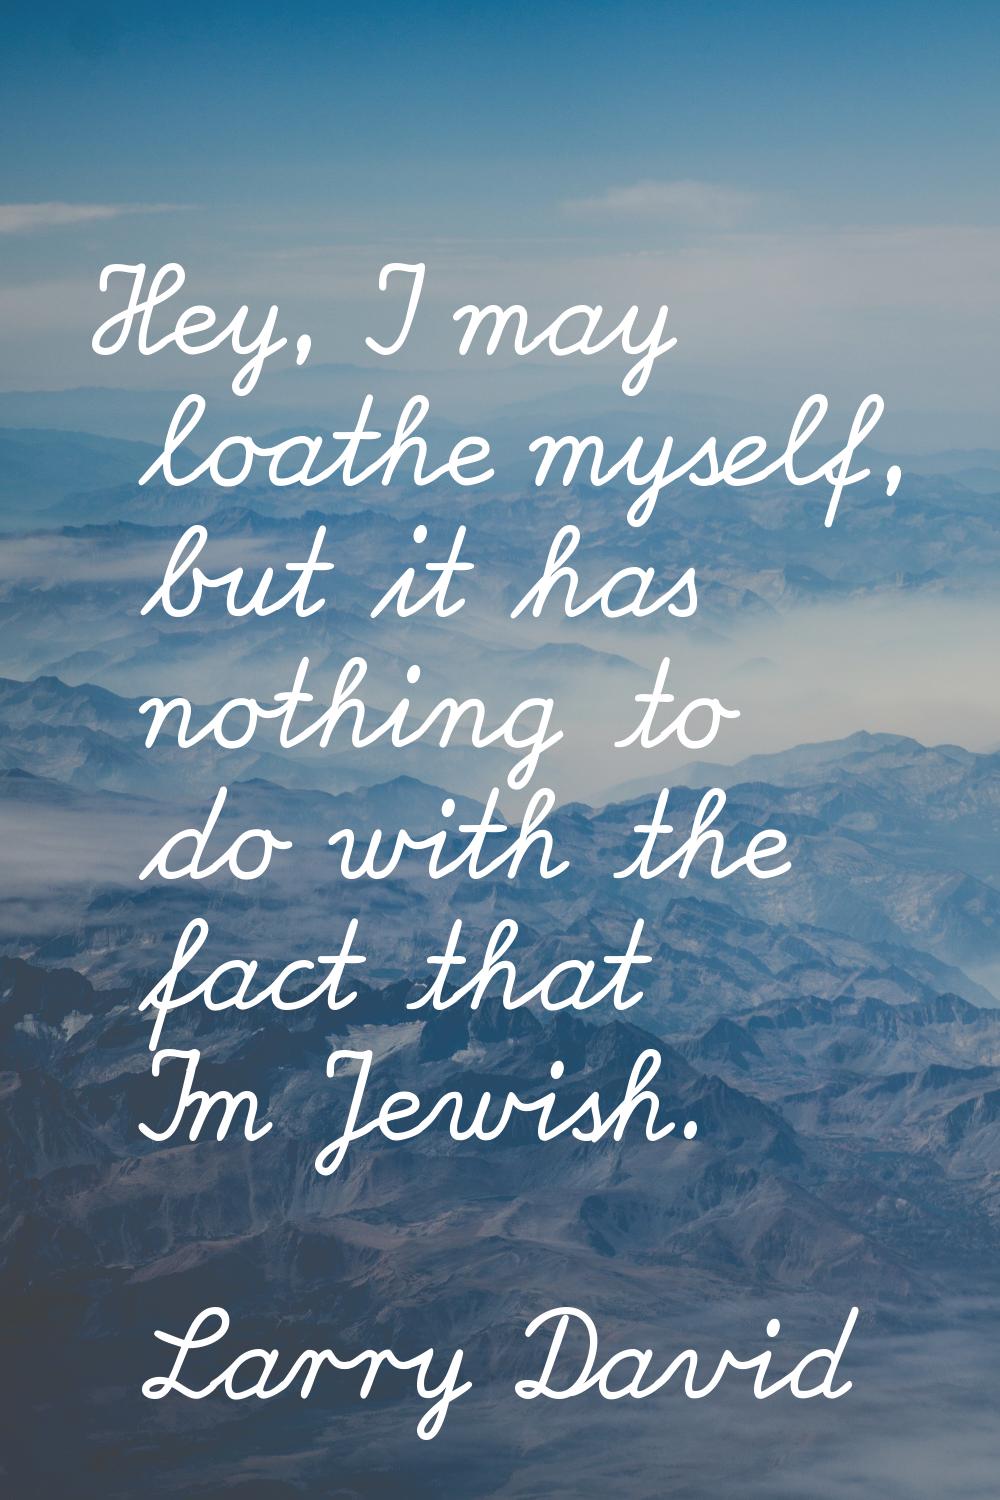 Hey, I may loathe myself, but it has nothing to do with the fact that I'm Jewish.